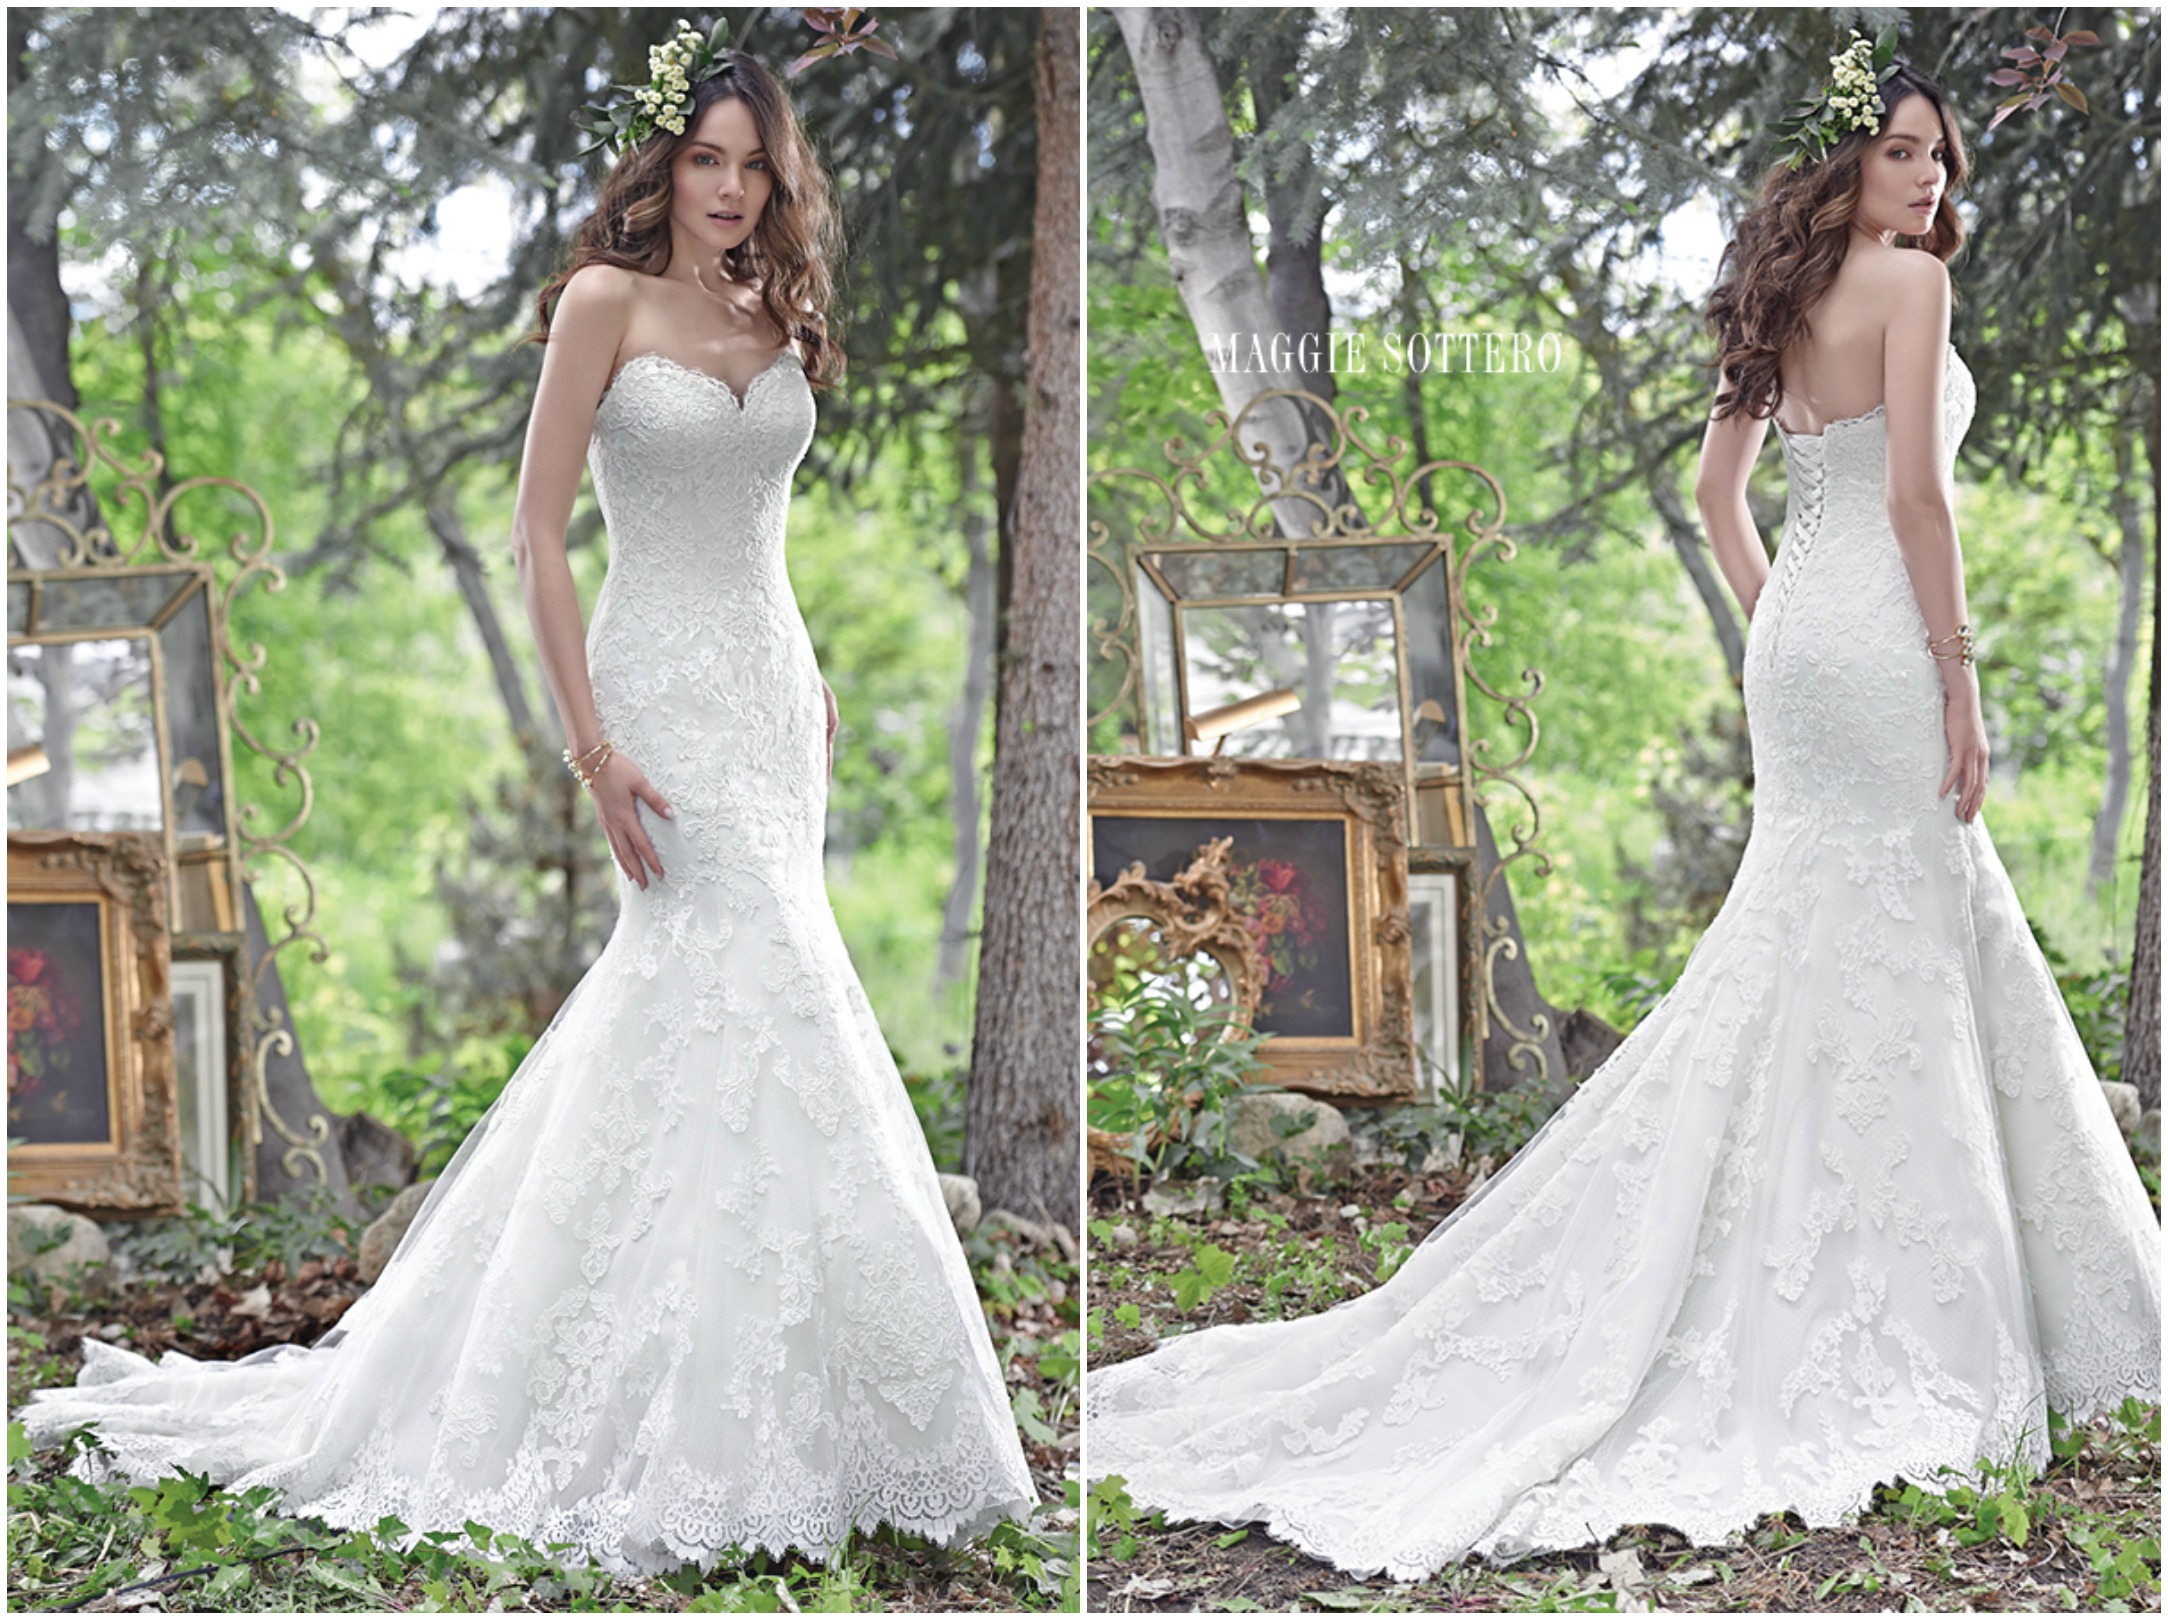 <a href="http://www.maggiesottero.com/maggie-sottero/cadence/9539" target="_blank">Maggie Sottero Spring 2016</a>